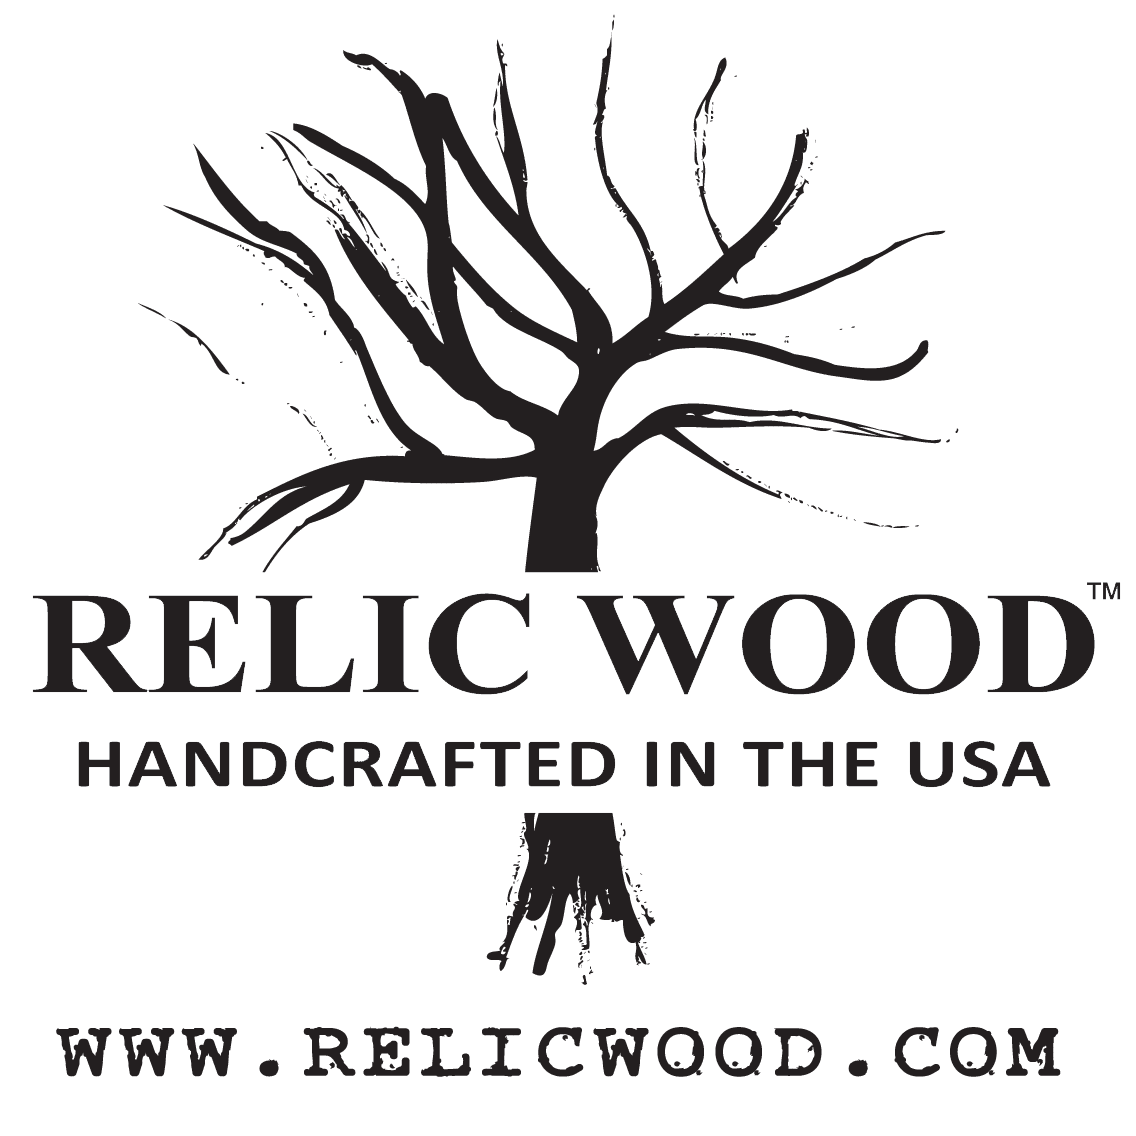 https://relicwood.com/wp-content/uploads/2019/10/Relic-Wood-Product-Stamp-NEW-1.png